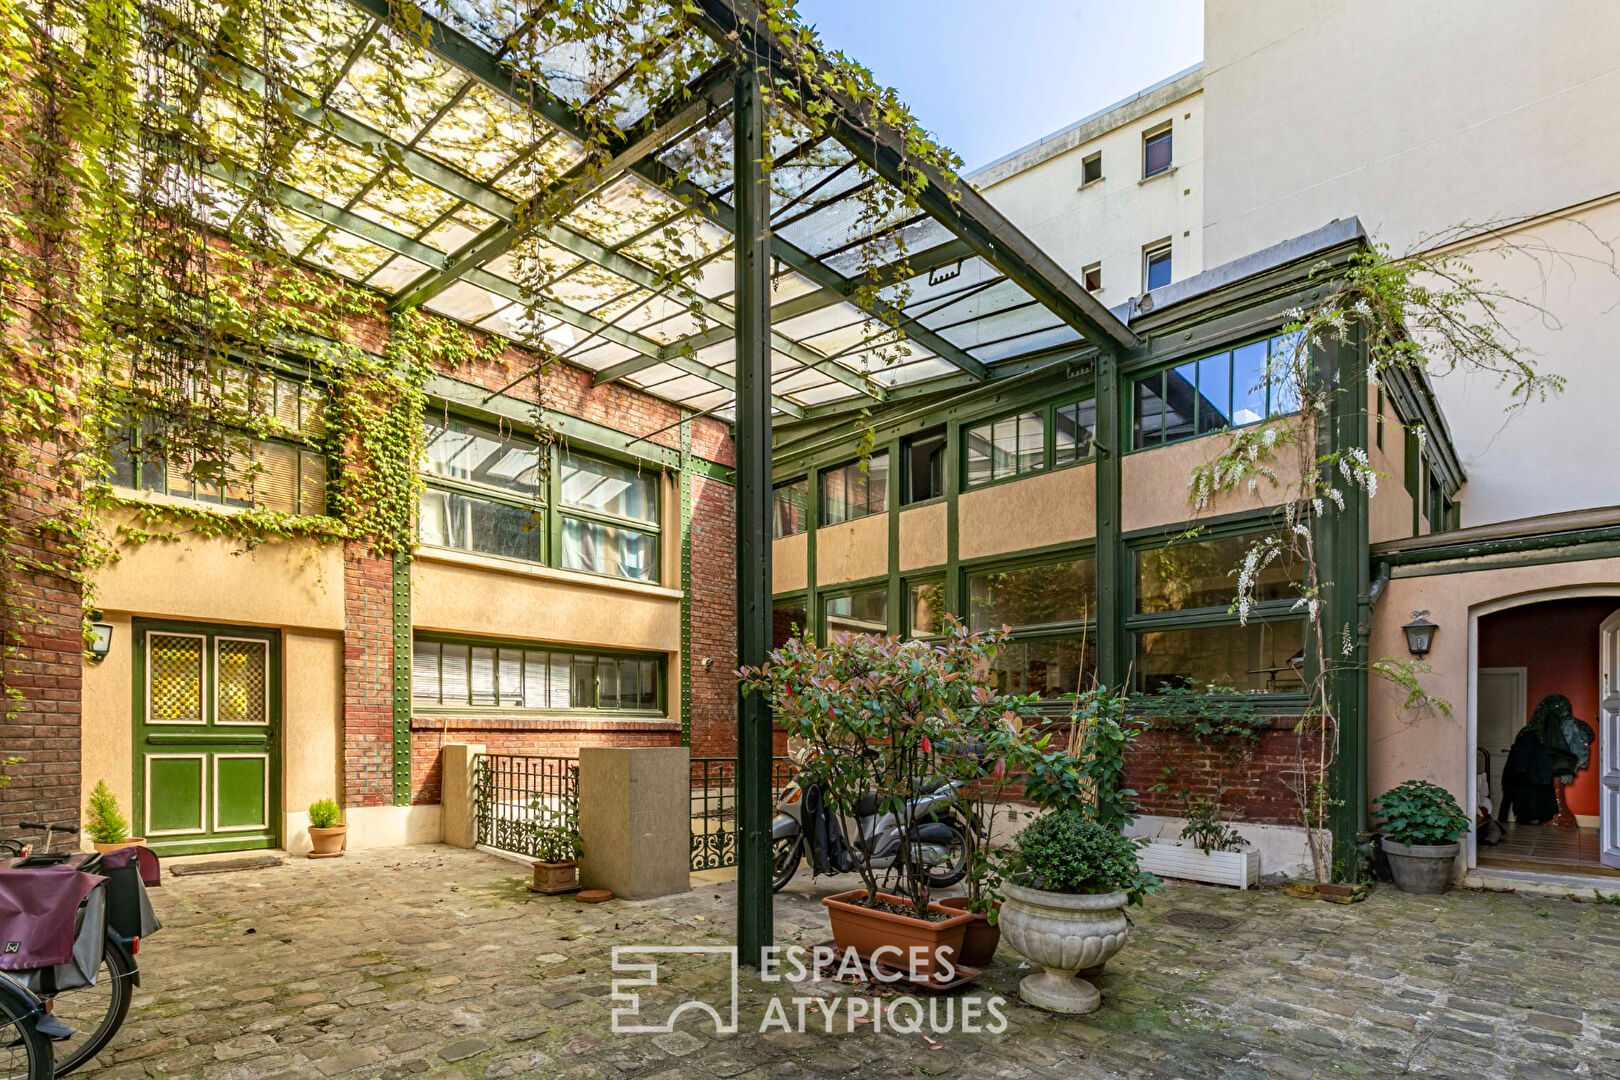 House-Loft with Eiffel structures with green garden